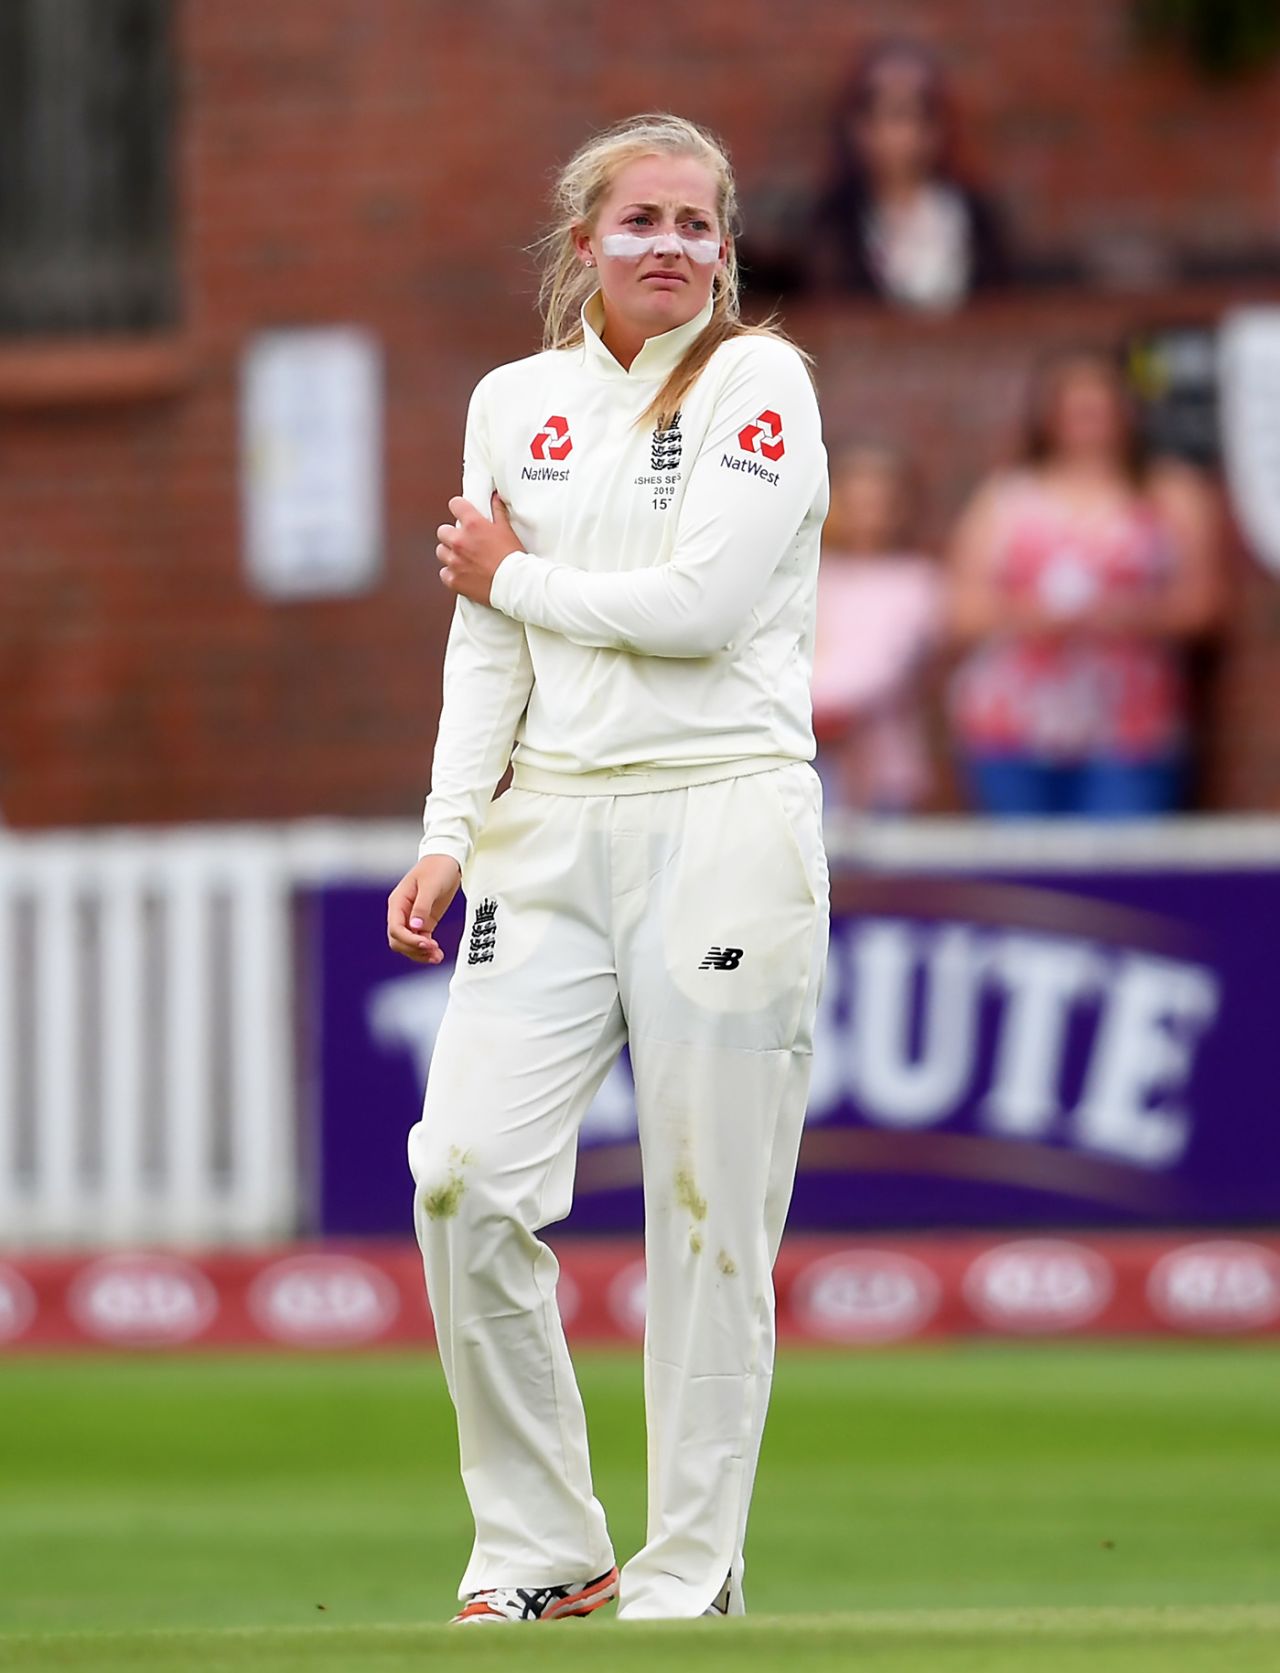 Sophie Ecclestone holds her arm after suffering an injury in the field, England v Australia, Women's Ashes Test, Taunton, 1st day, July 18, 2019